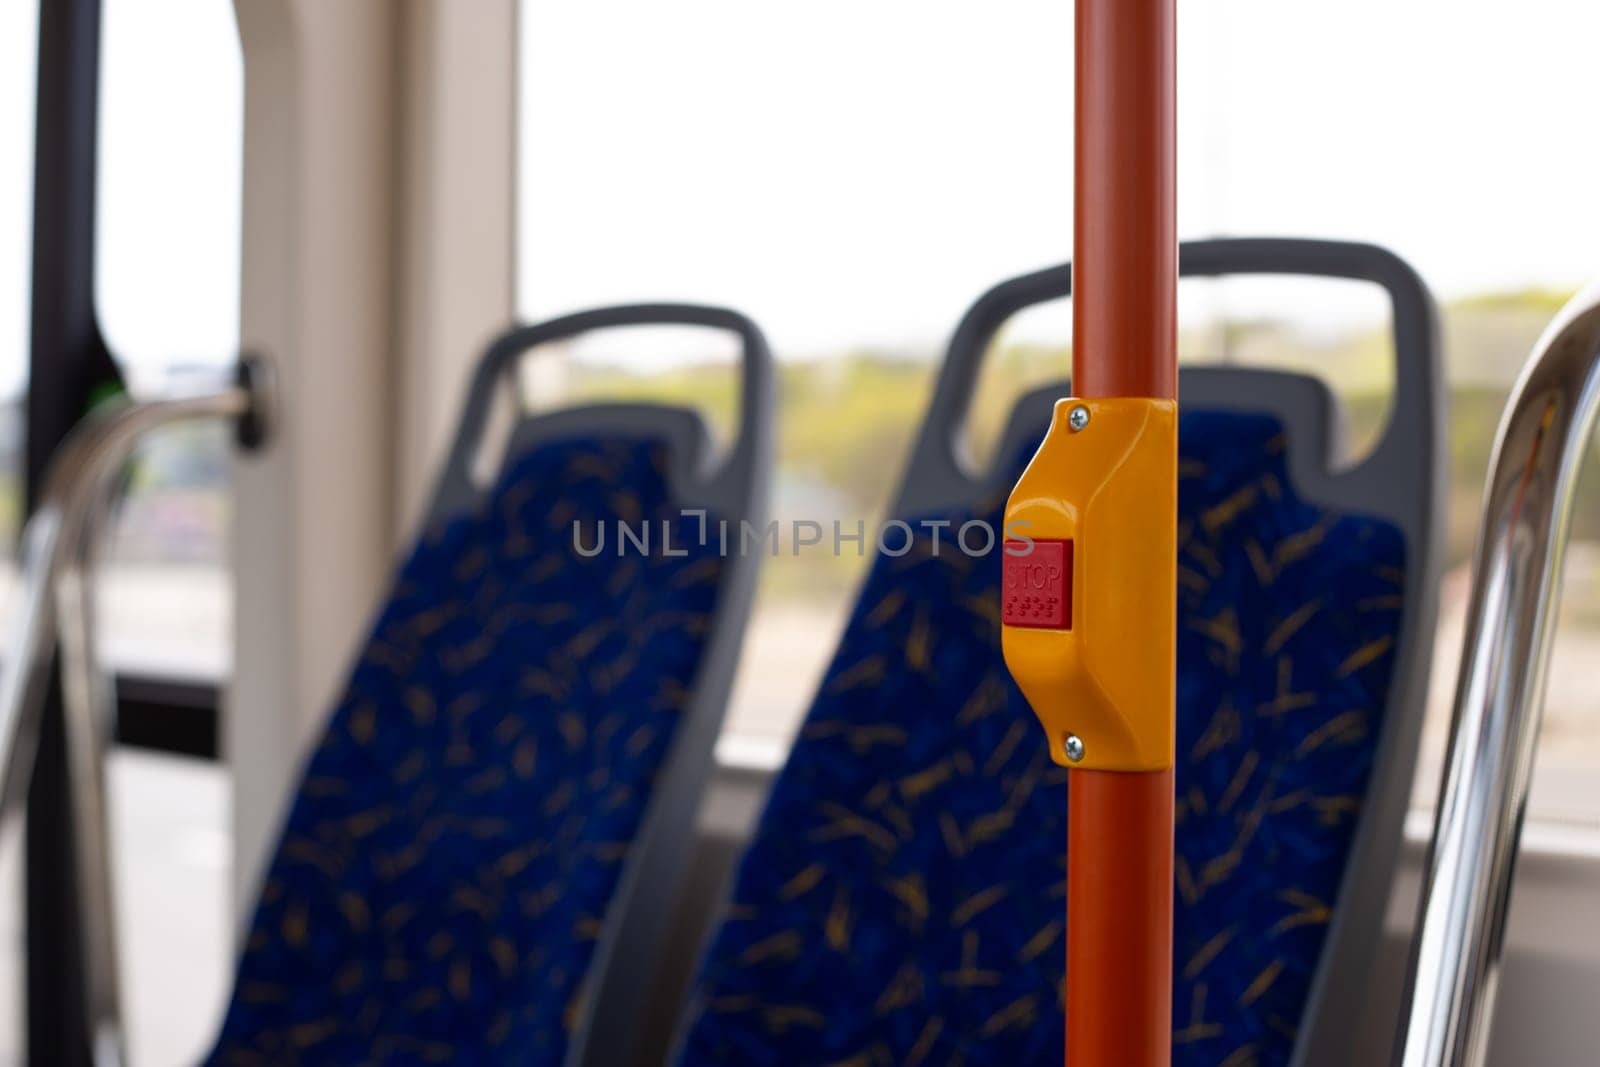 Handrail in city transport with button to stop, stop button in modern public transport with braille text for disabled people